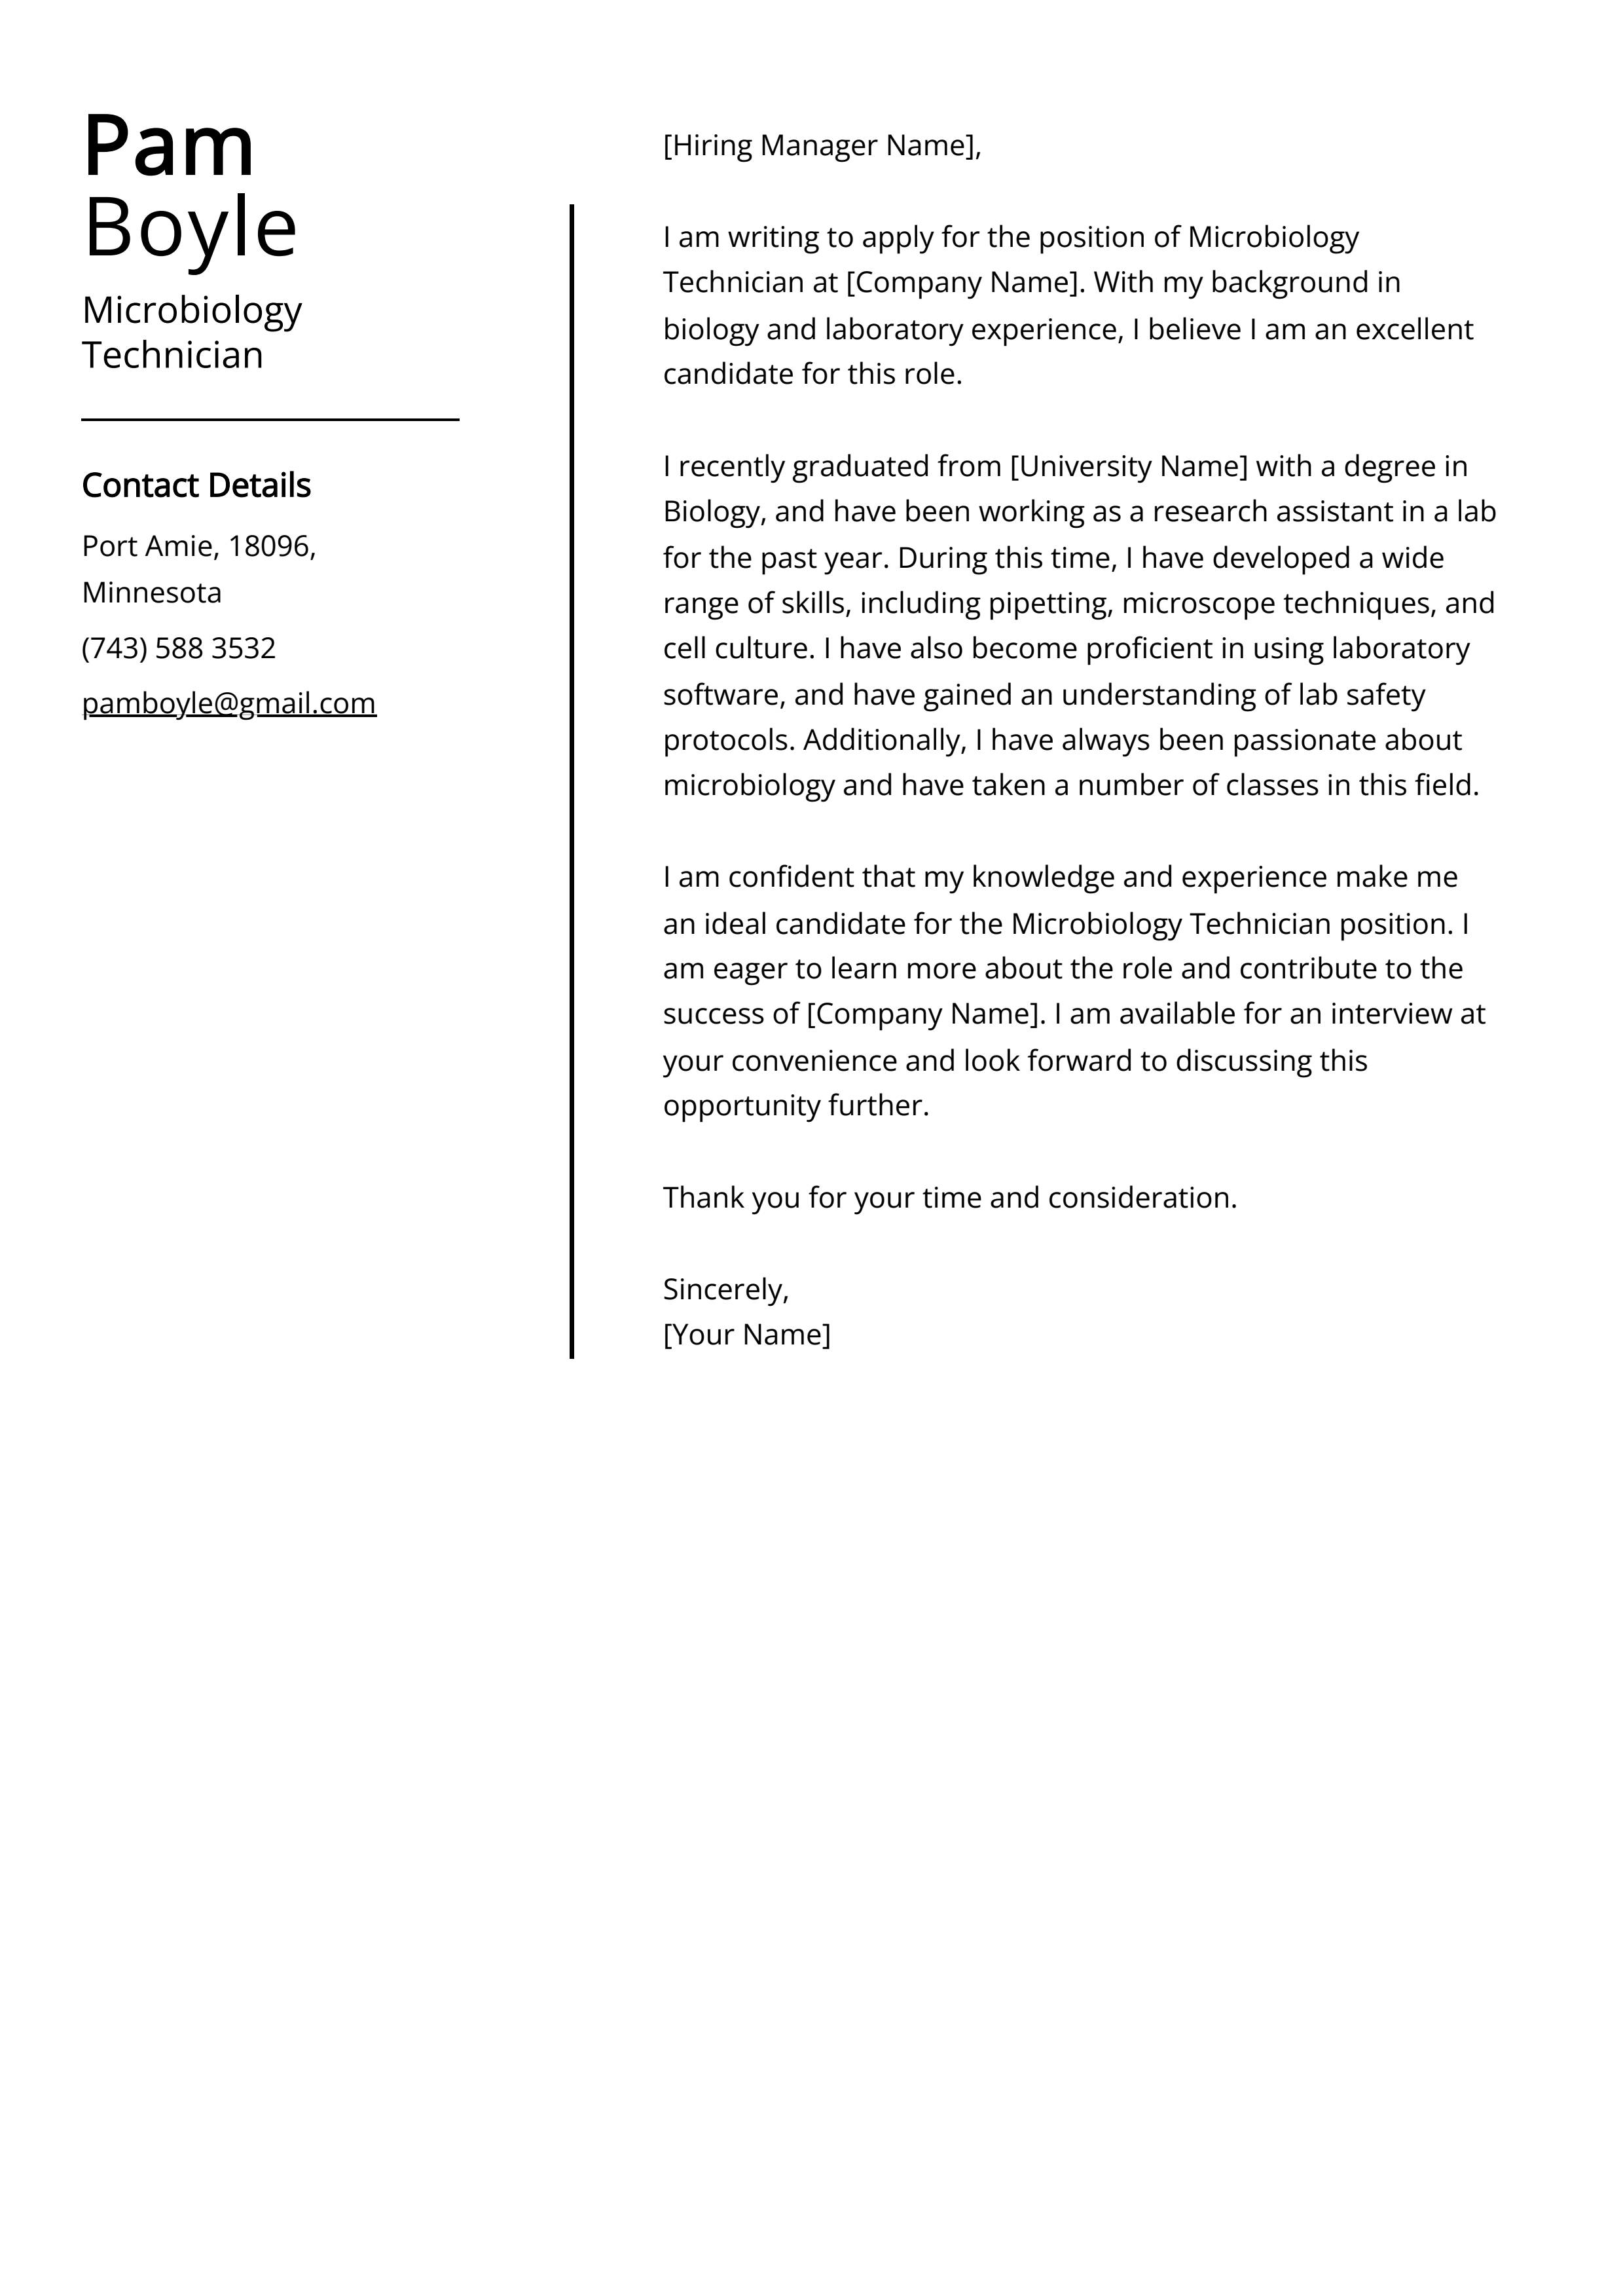 Microbiology Technician Cover Letter Example